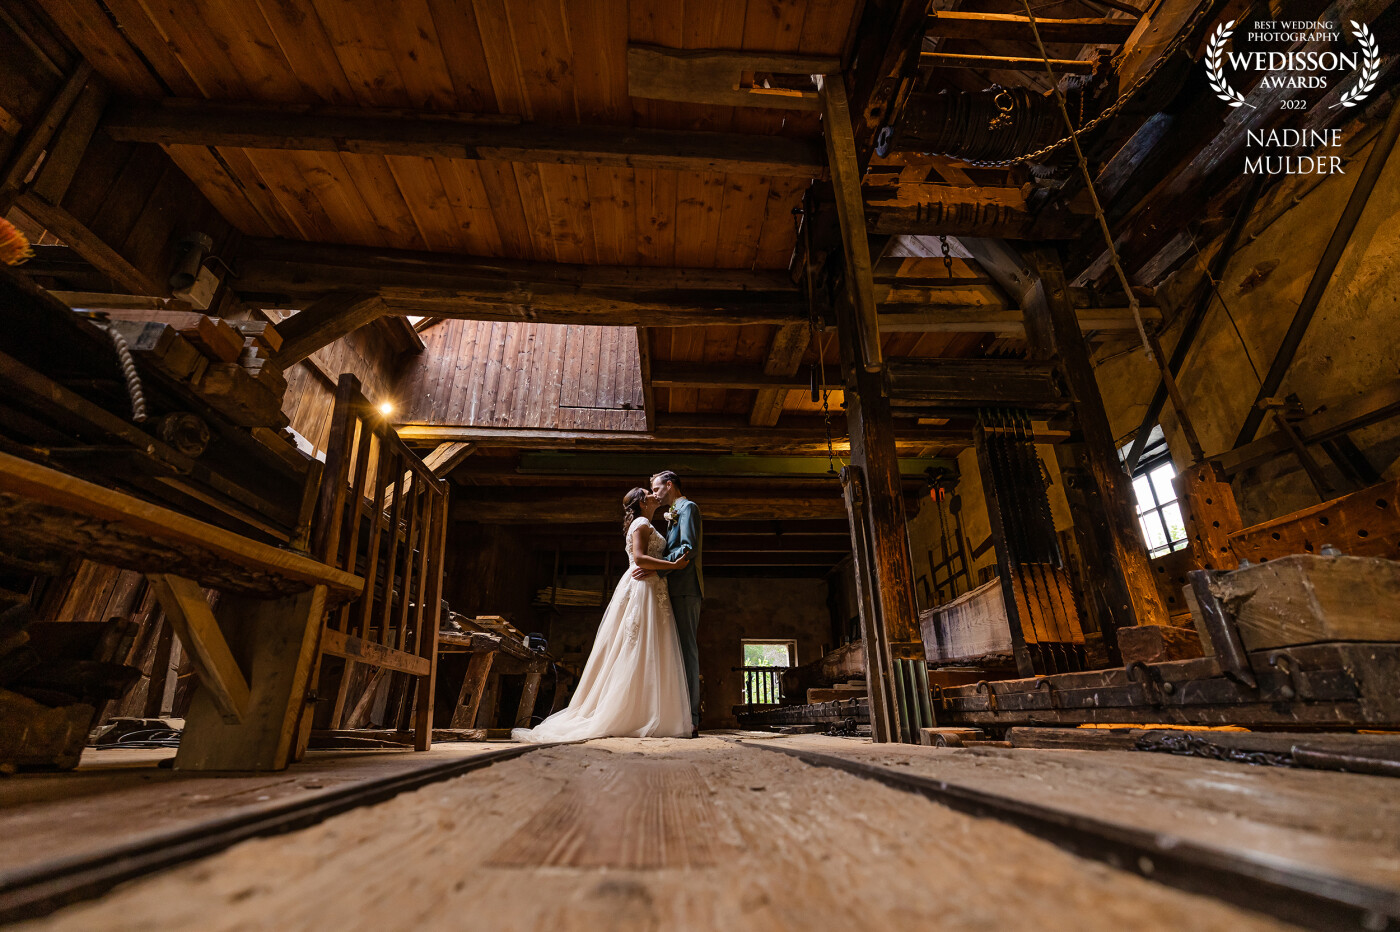 This couple married at an amazing location. After the ceremony everyone moved to the party location. A loud sound of a machine caught my attention and I spotted this location, a beautiful sawmill. I loved the colors and the natural light inside and asked these newlyweds to pose for this picture.